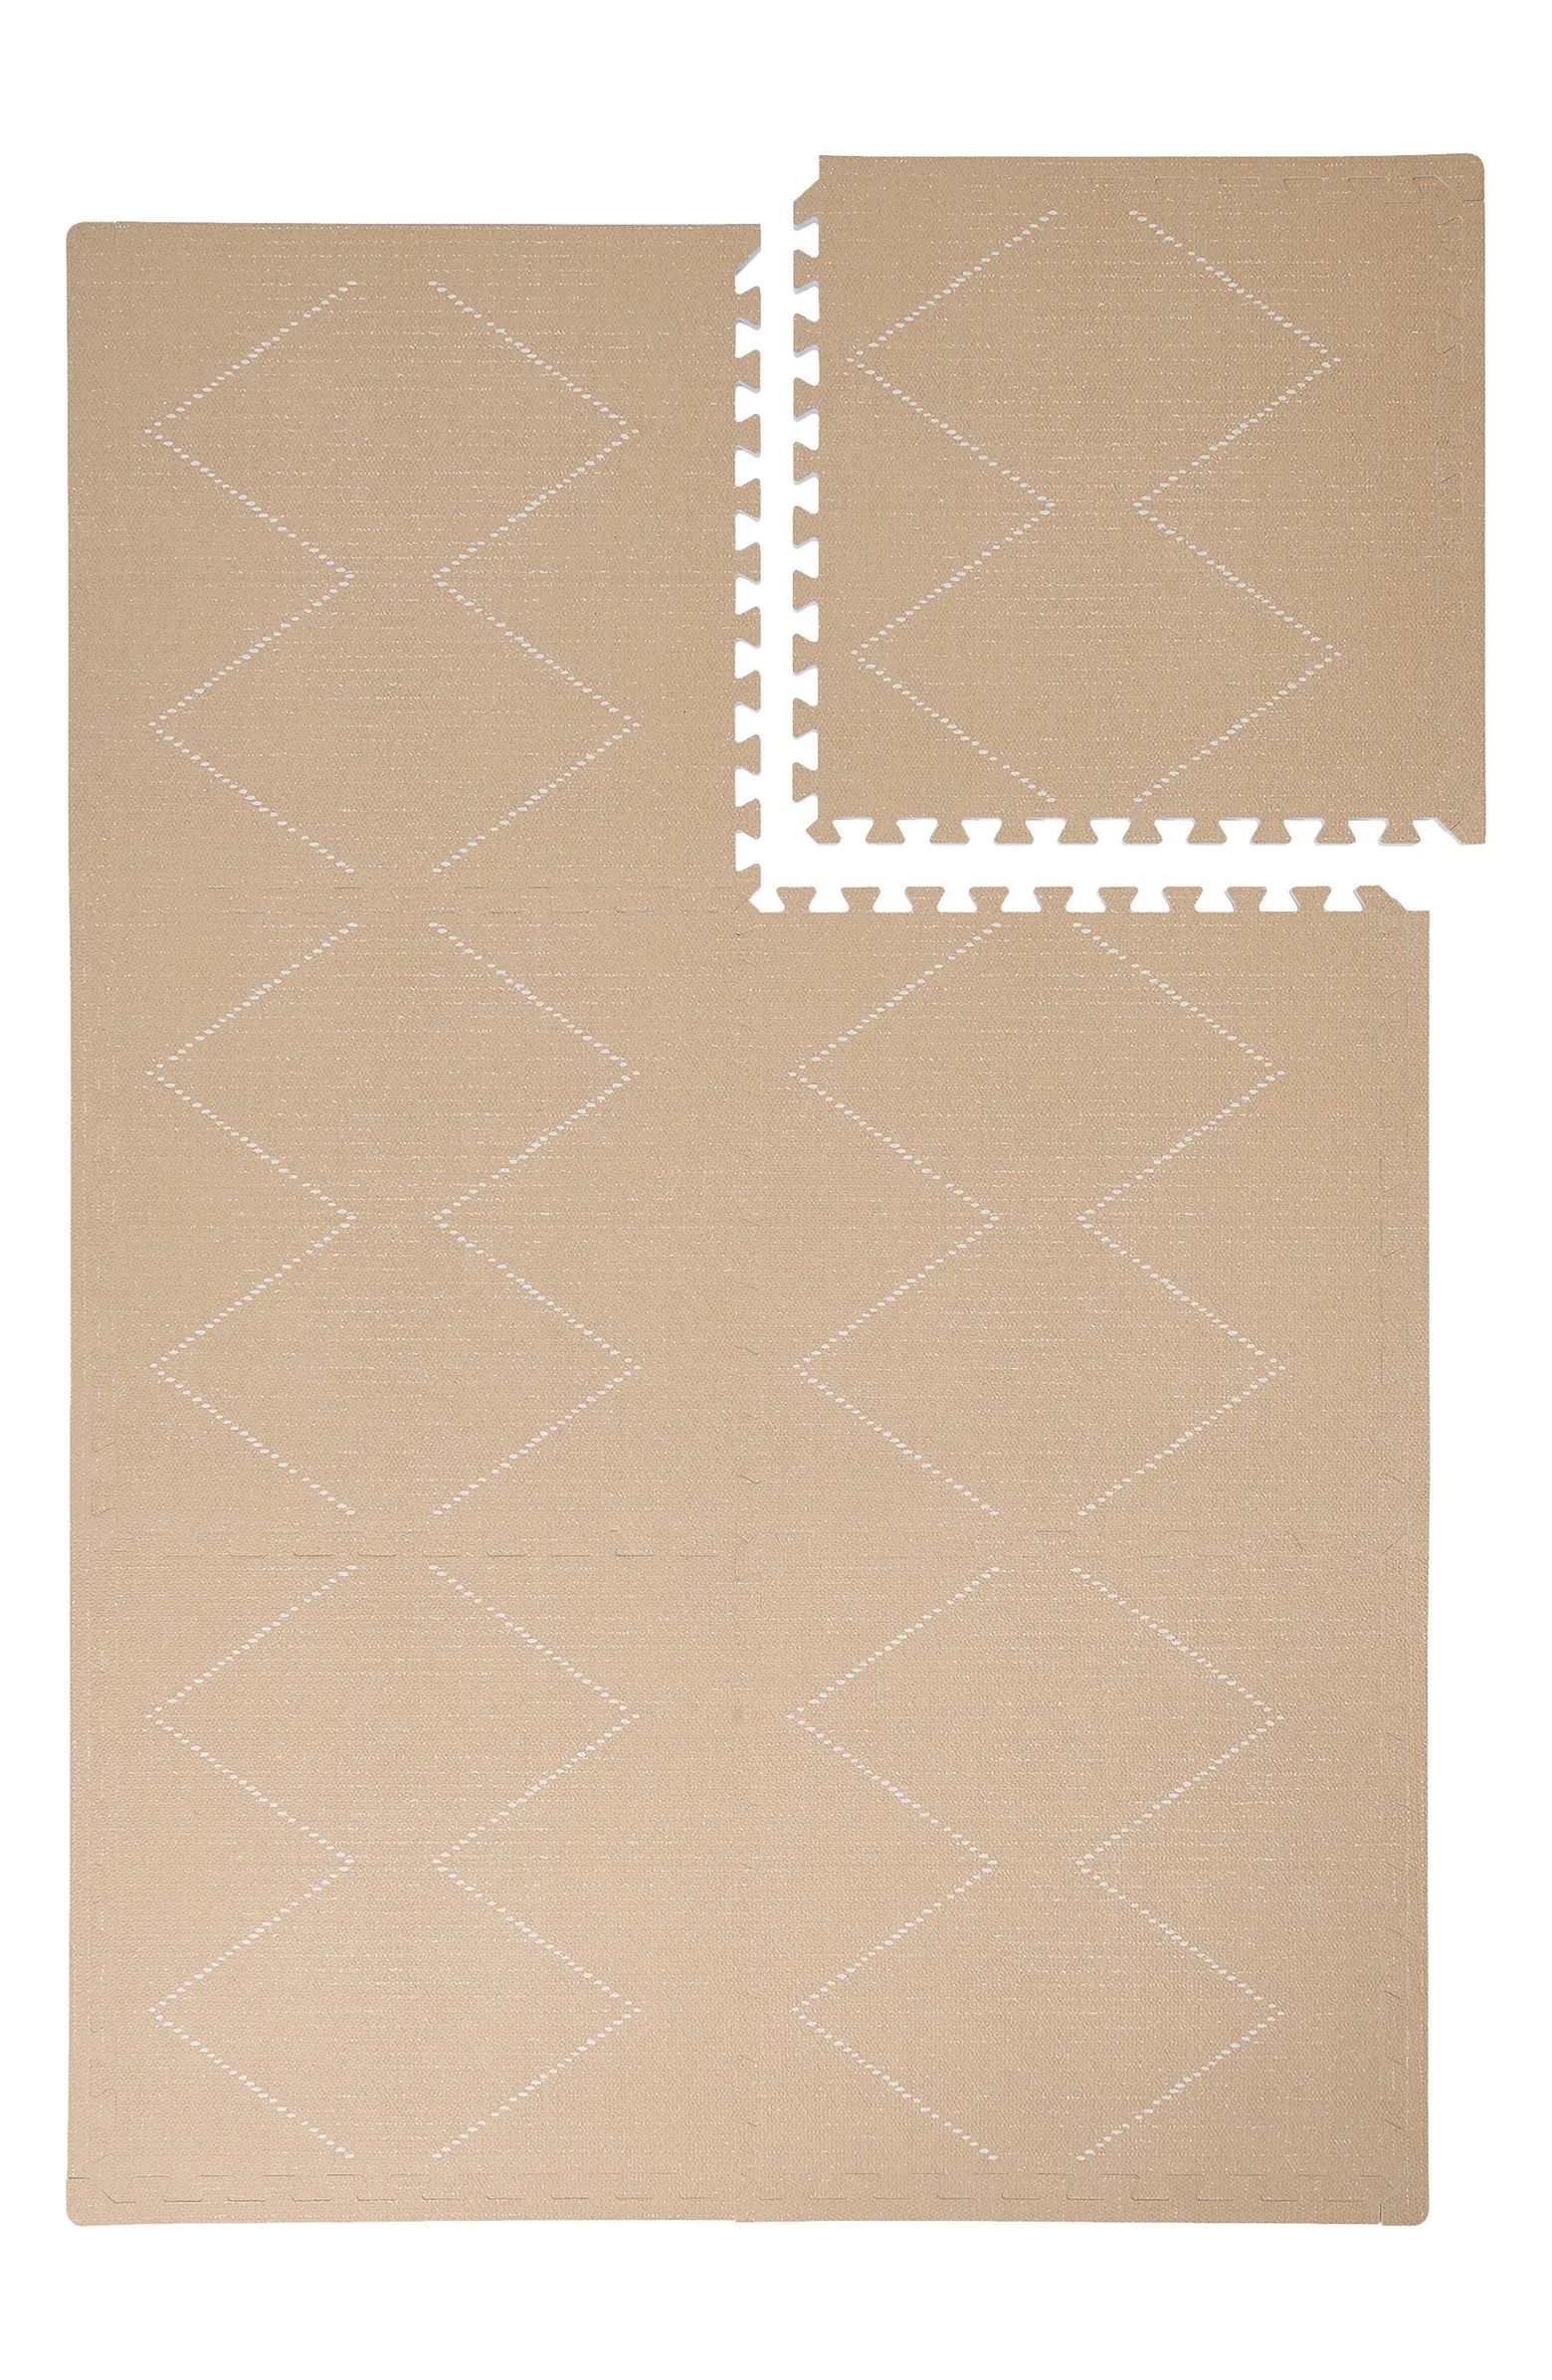 FoamPuzzle Baby Play Mat | Nordstrom